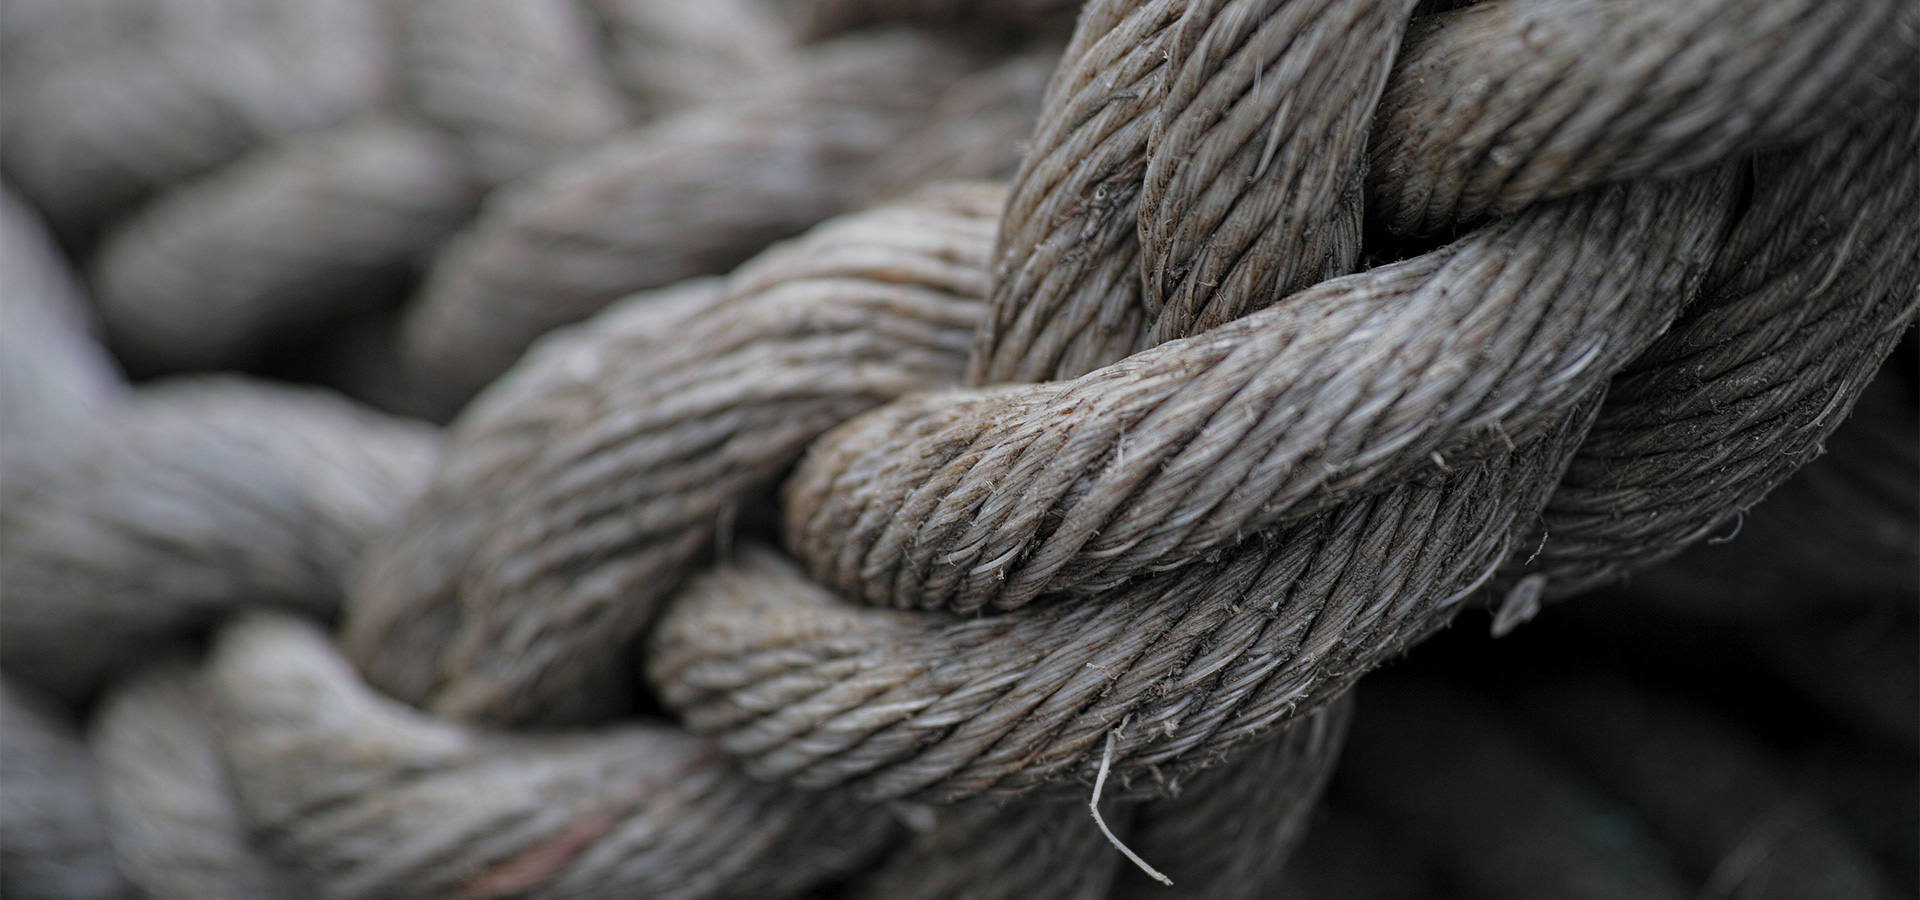 Rope in the background of the KPI (Photo)